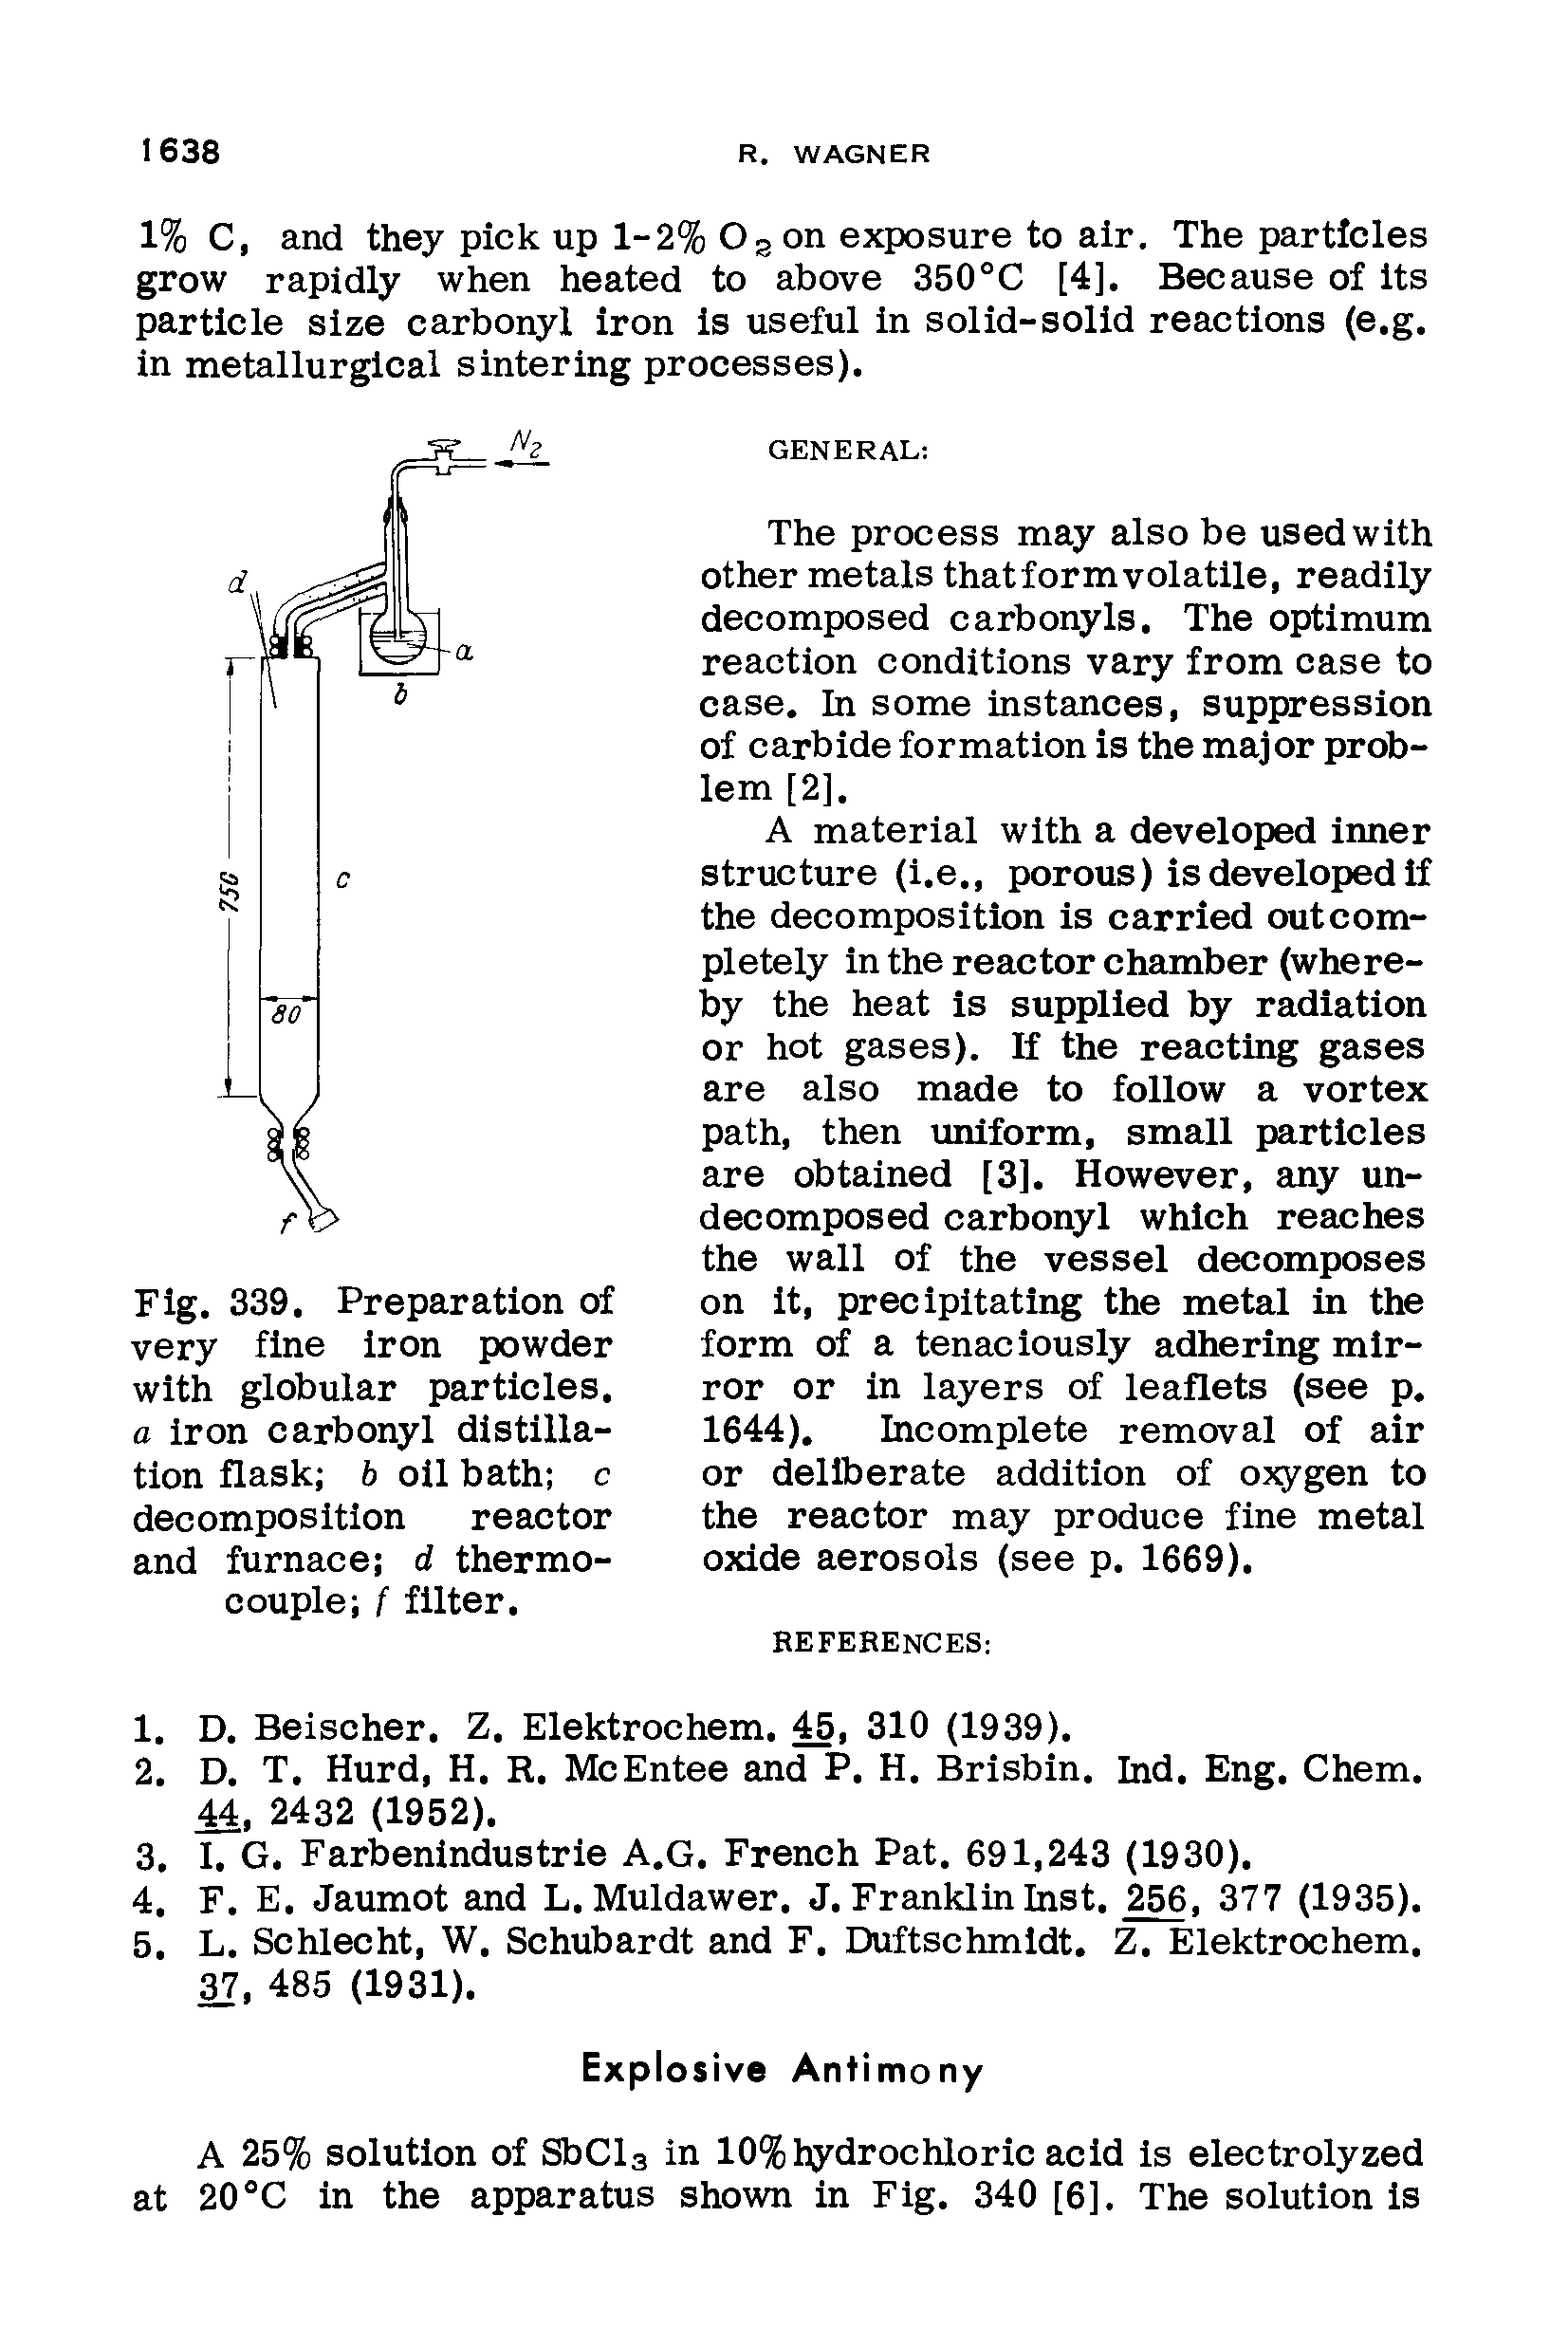 Fig. 339. Preparation of very fine iron powder with globular particles. a iron carbonyl distillation flask b oil bath c decomposition reactor and furnace d thermocouple f filter.